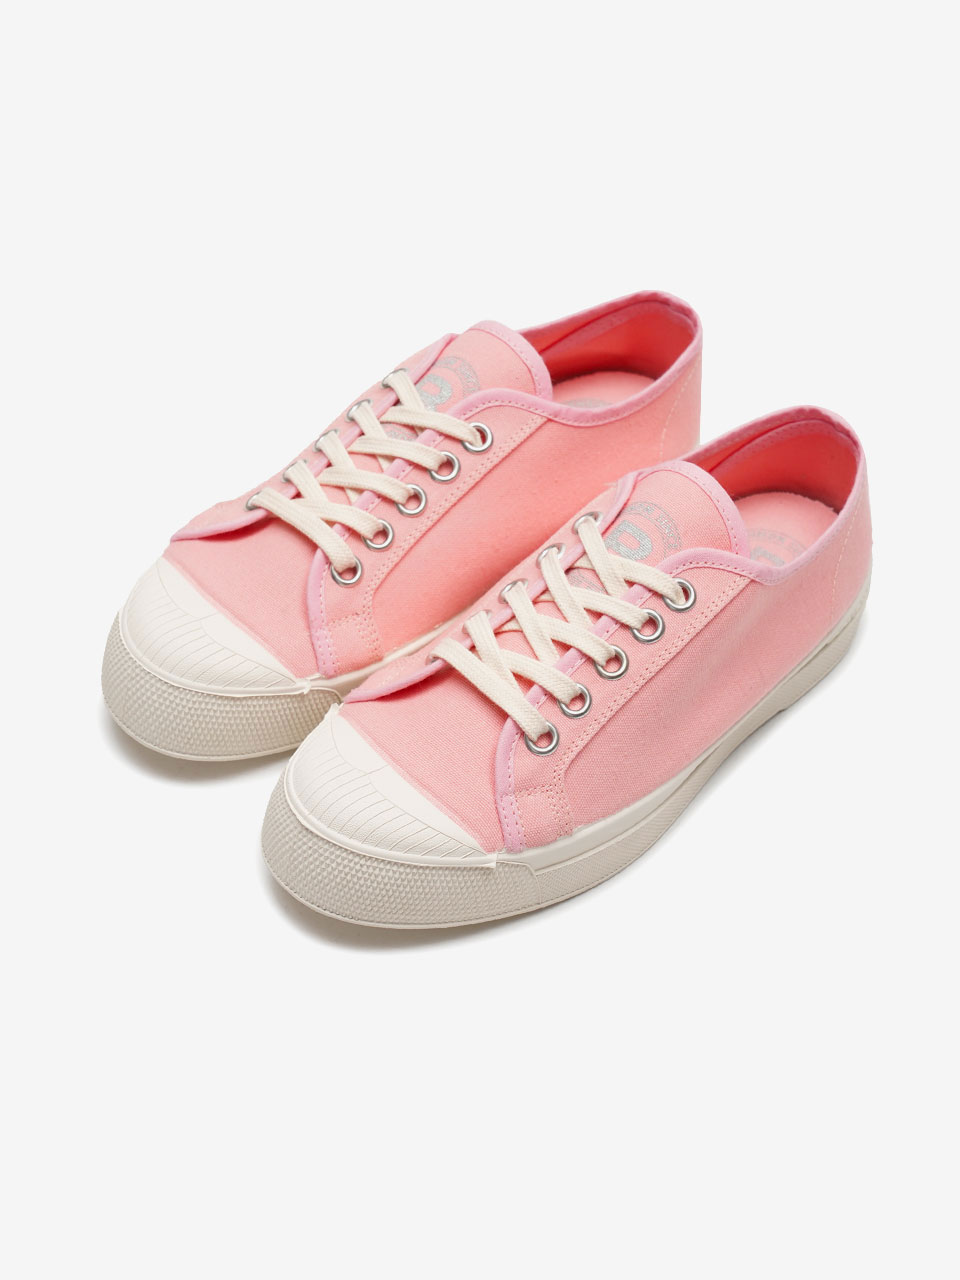 LIMITED ROMY B79 - PALE PINK